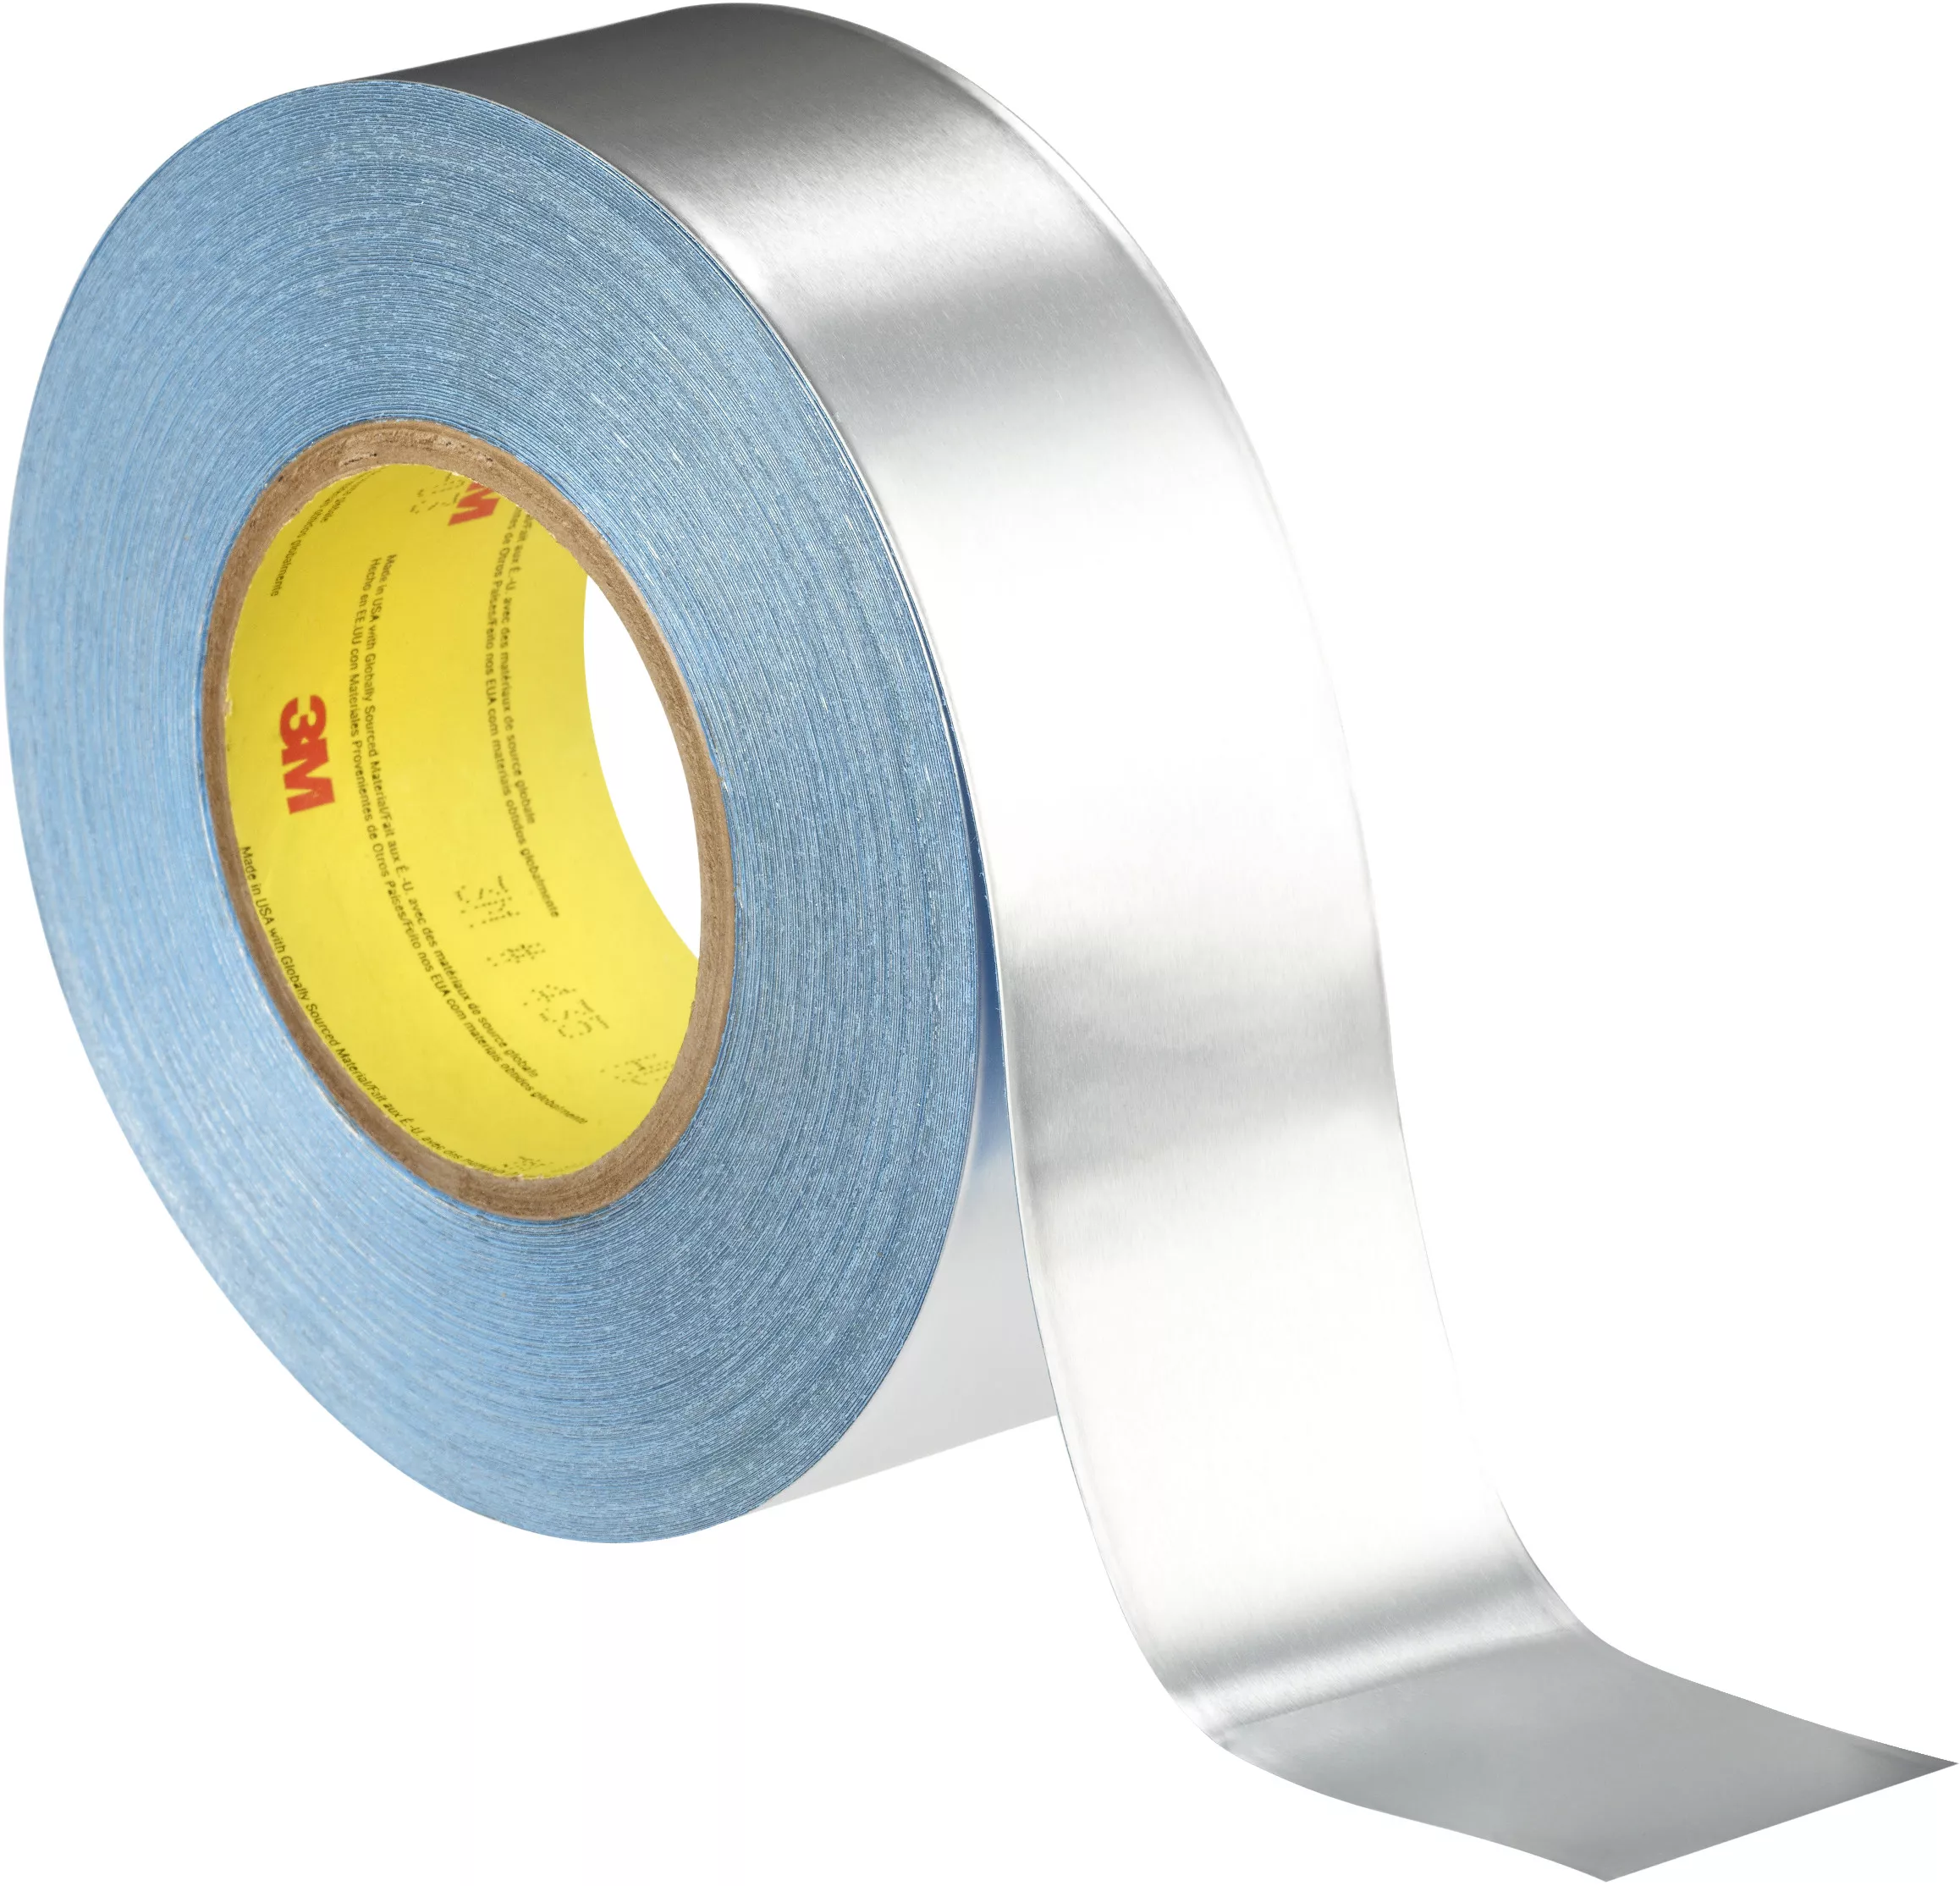 3M™ Vibration Damping Tape 436, Silver, 2 in x 36 yd, 17.5 mil, 6
Roll/Case